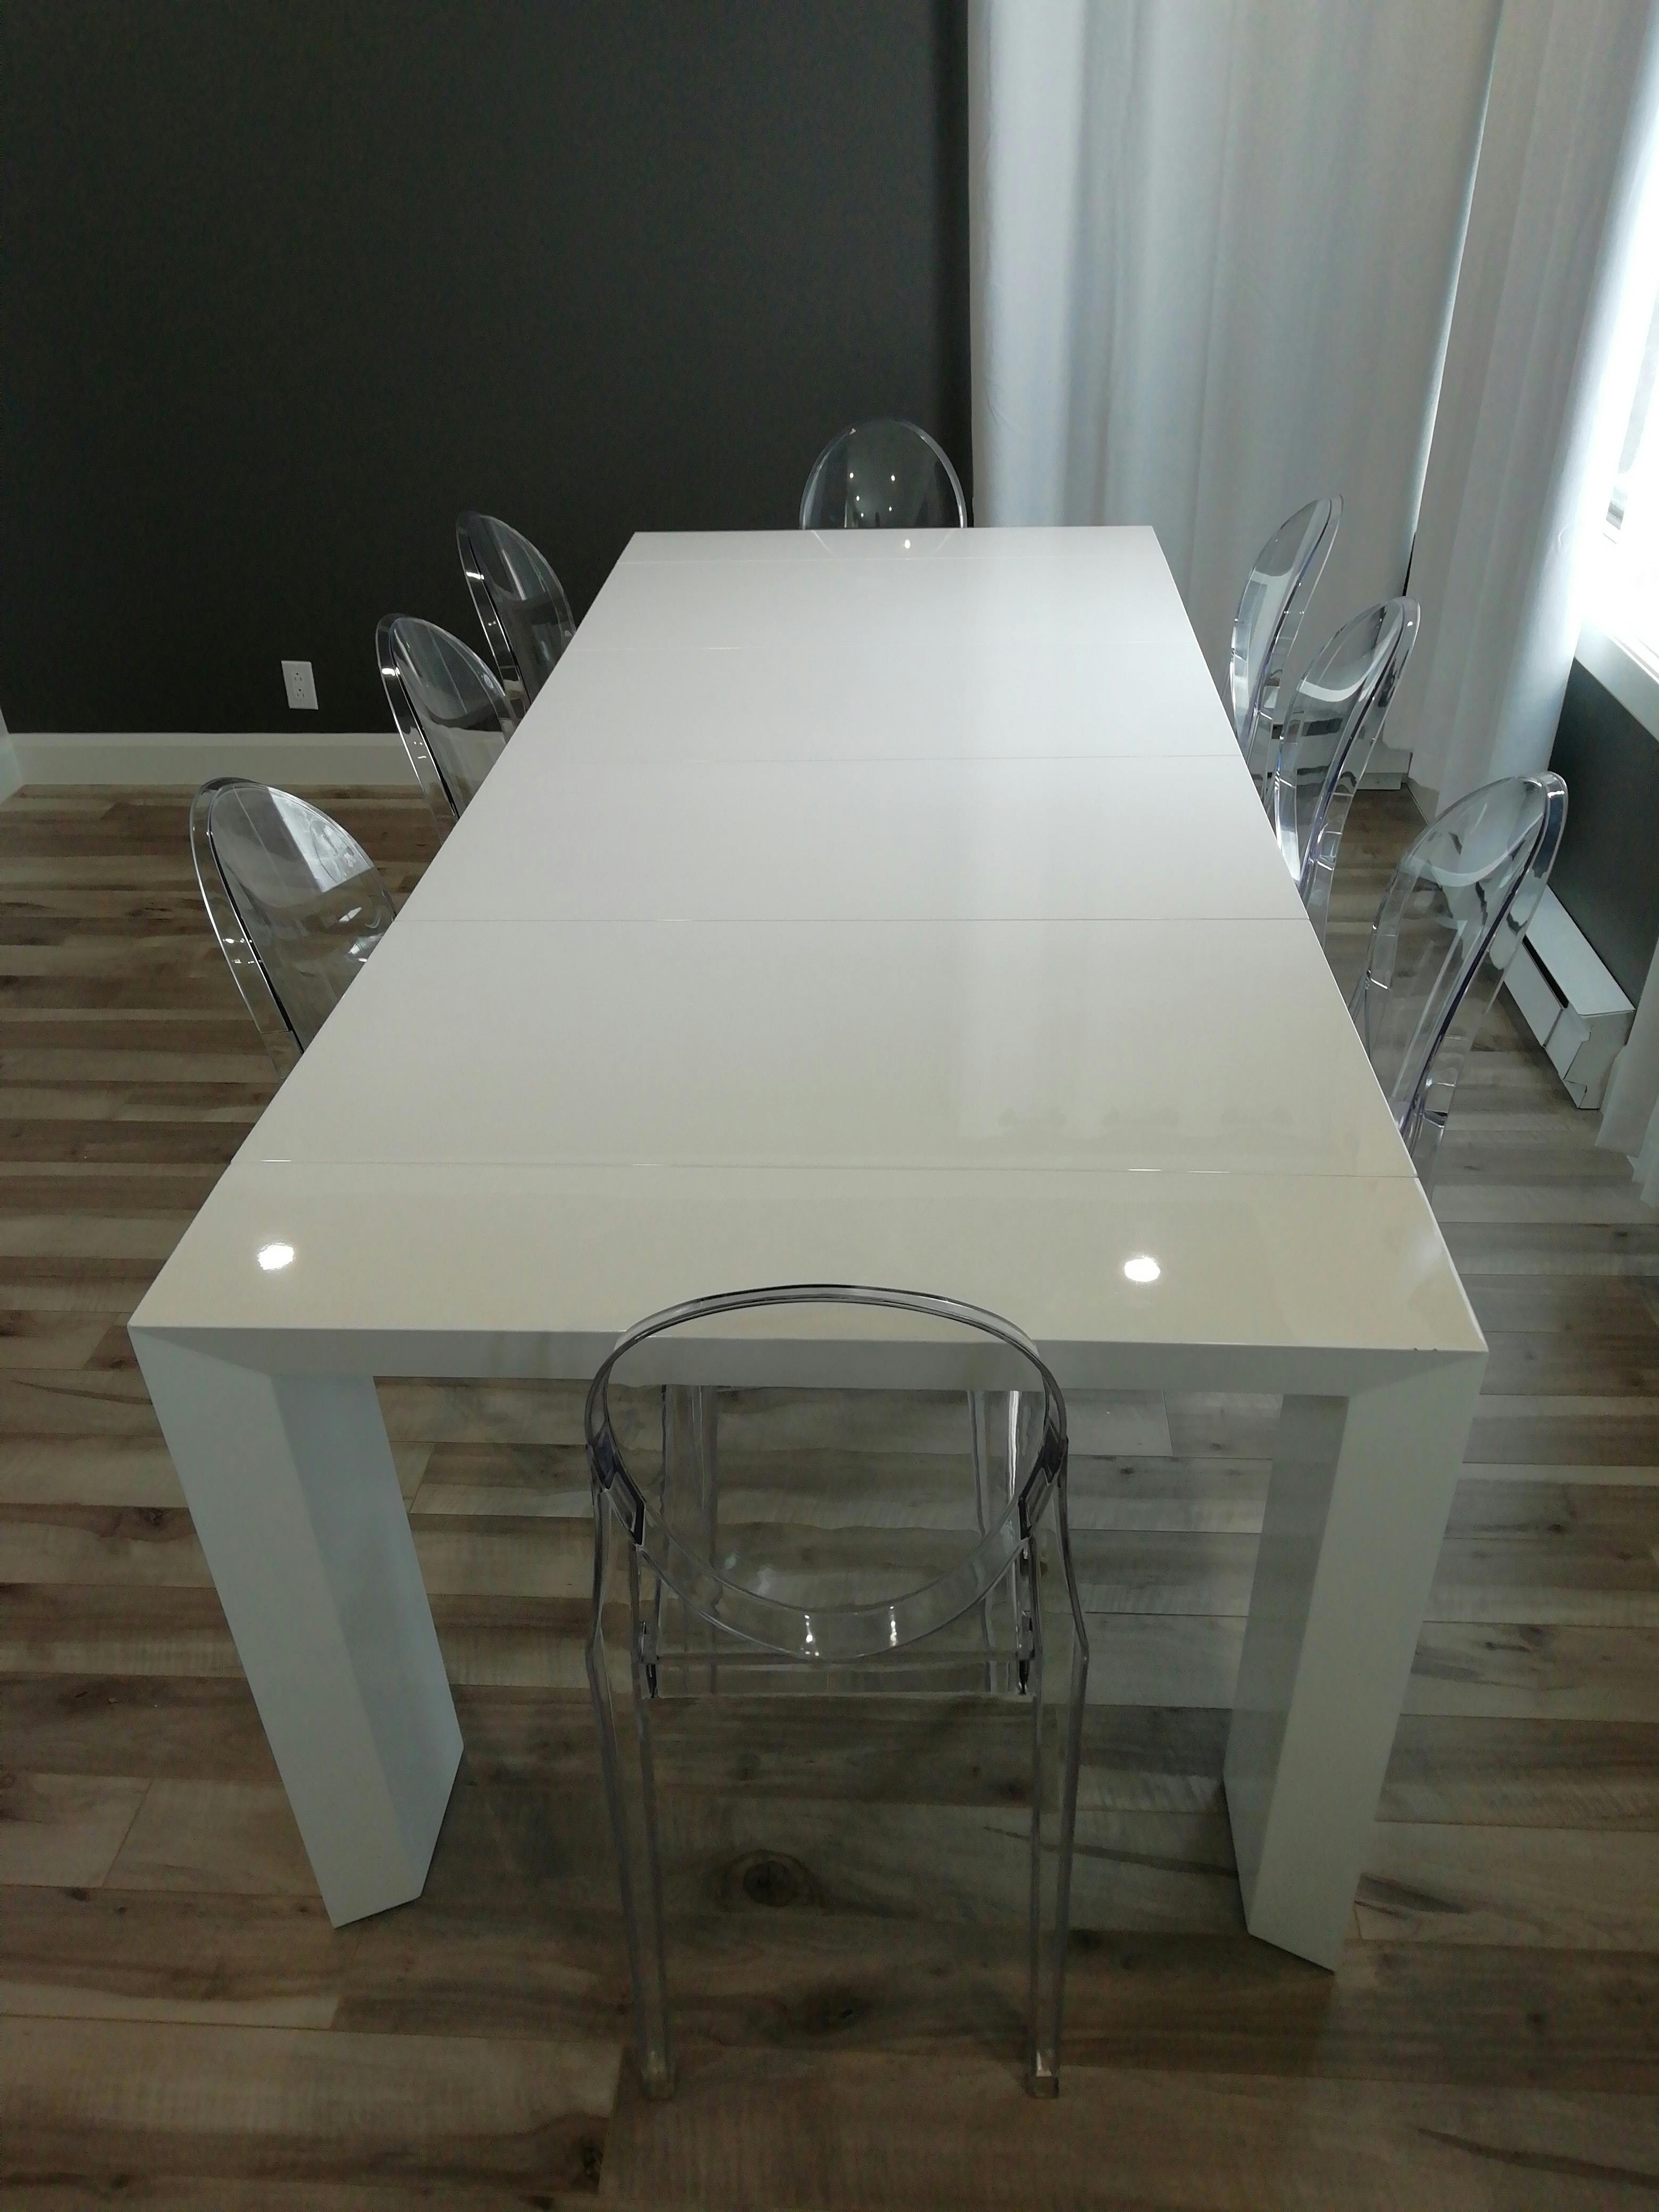 Giant Edge - Modern Dining Table | Expand